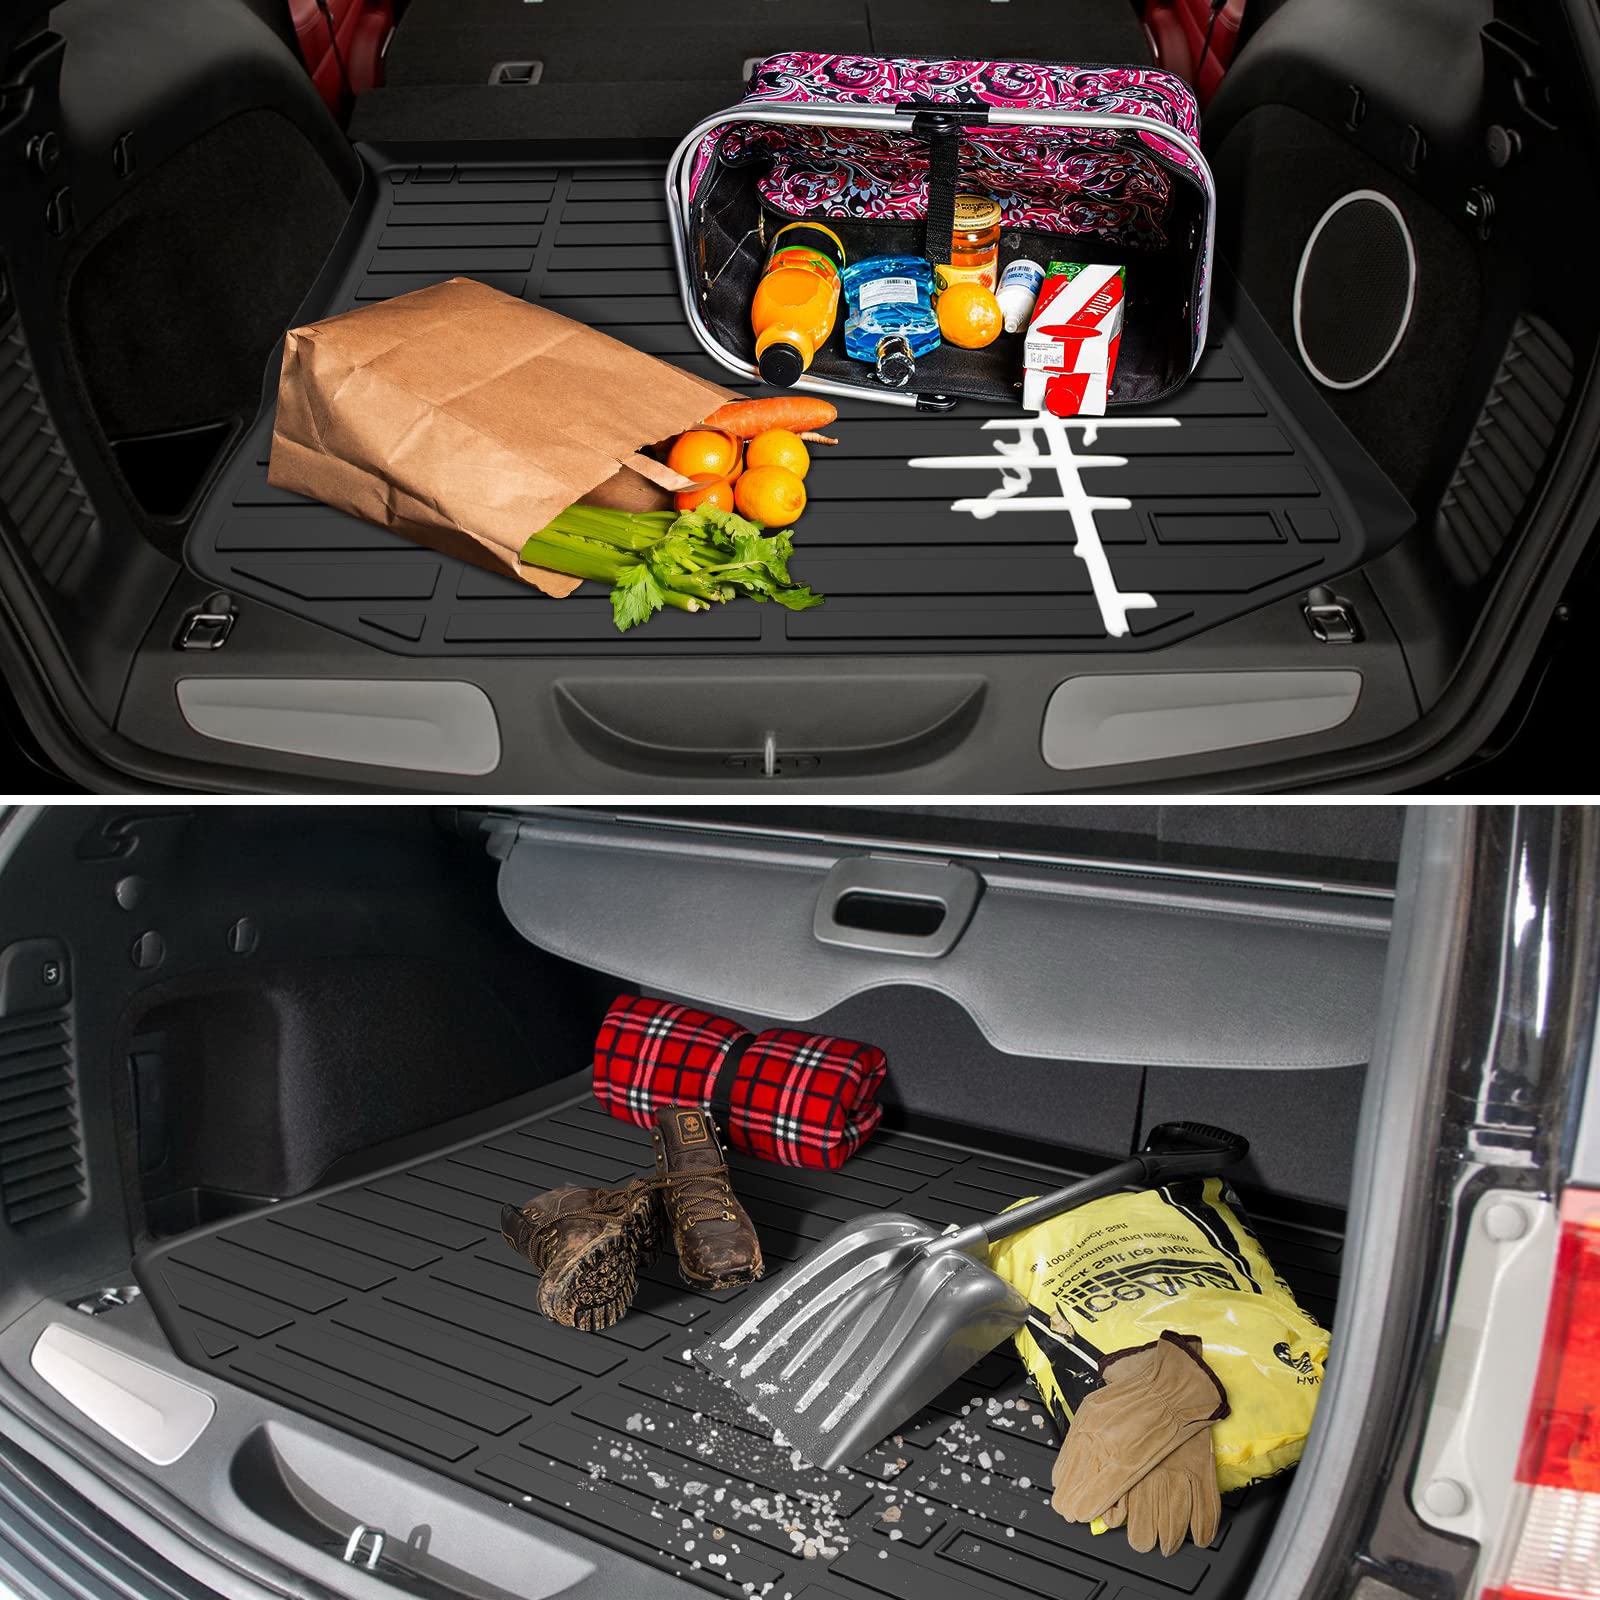 GARVEE Car Trunk Protector All-Weather Rear Cargo Area Mat Floor Mat for 2017-2022 Mazda CX-5